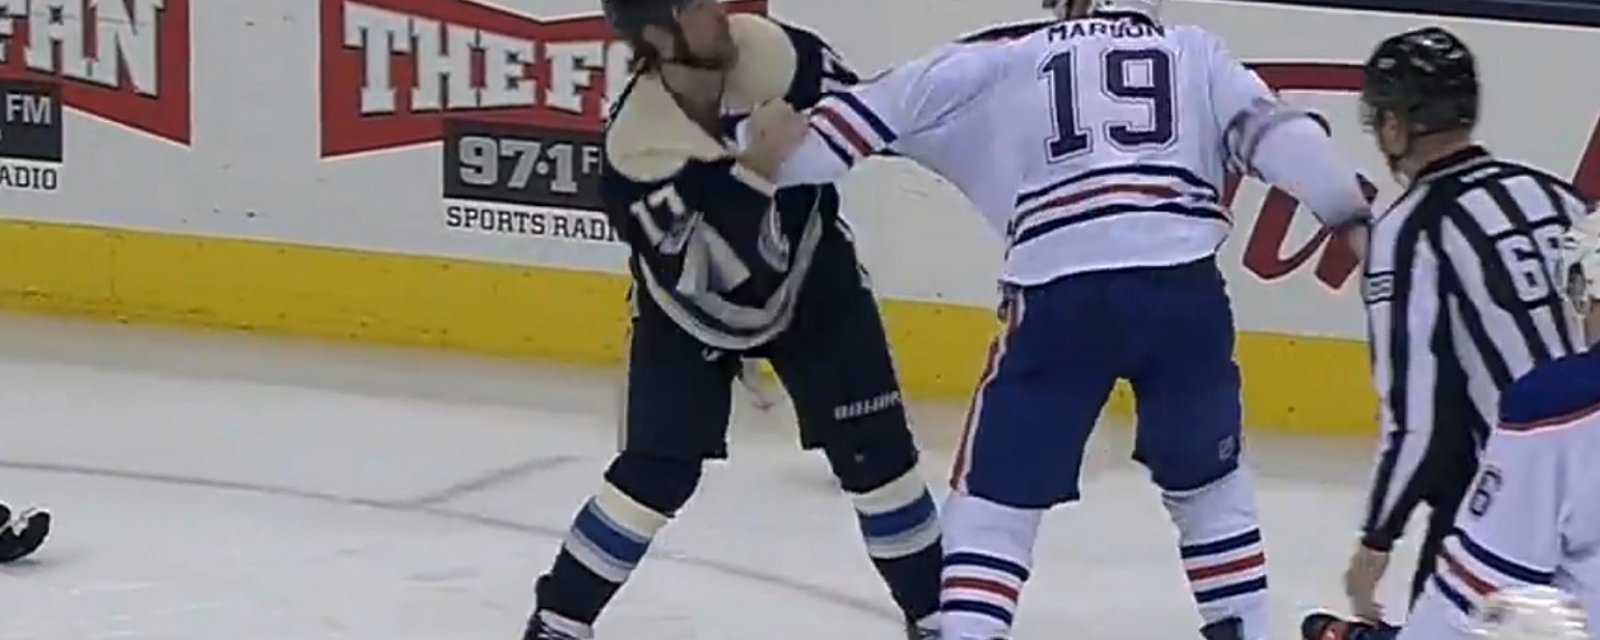 Dubinsky takes a huge hit and follows it up with a solid fight.